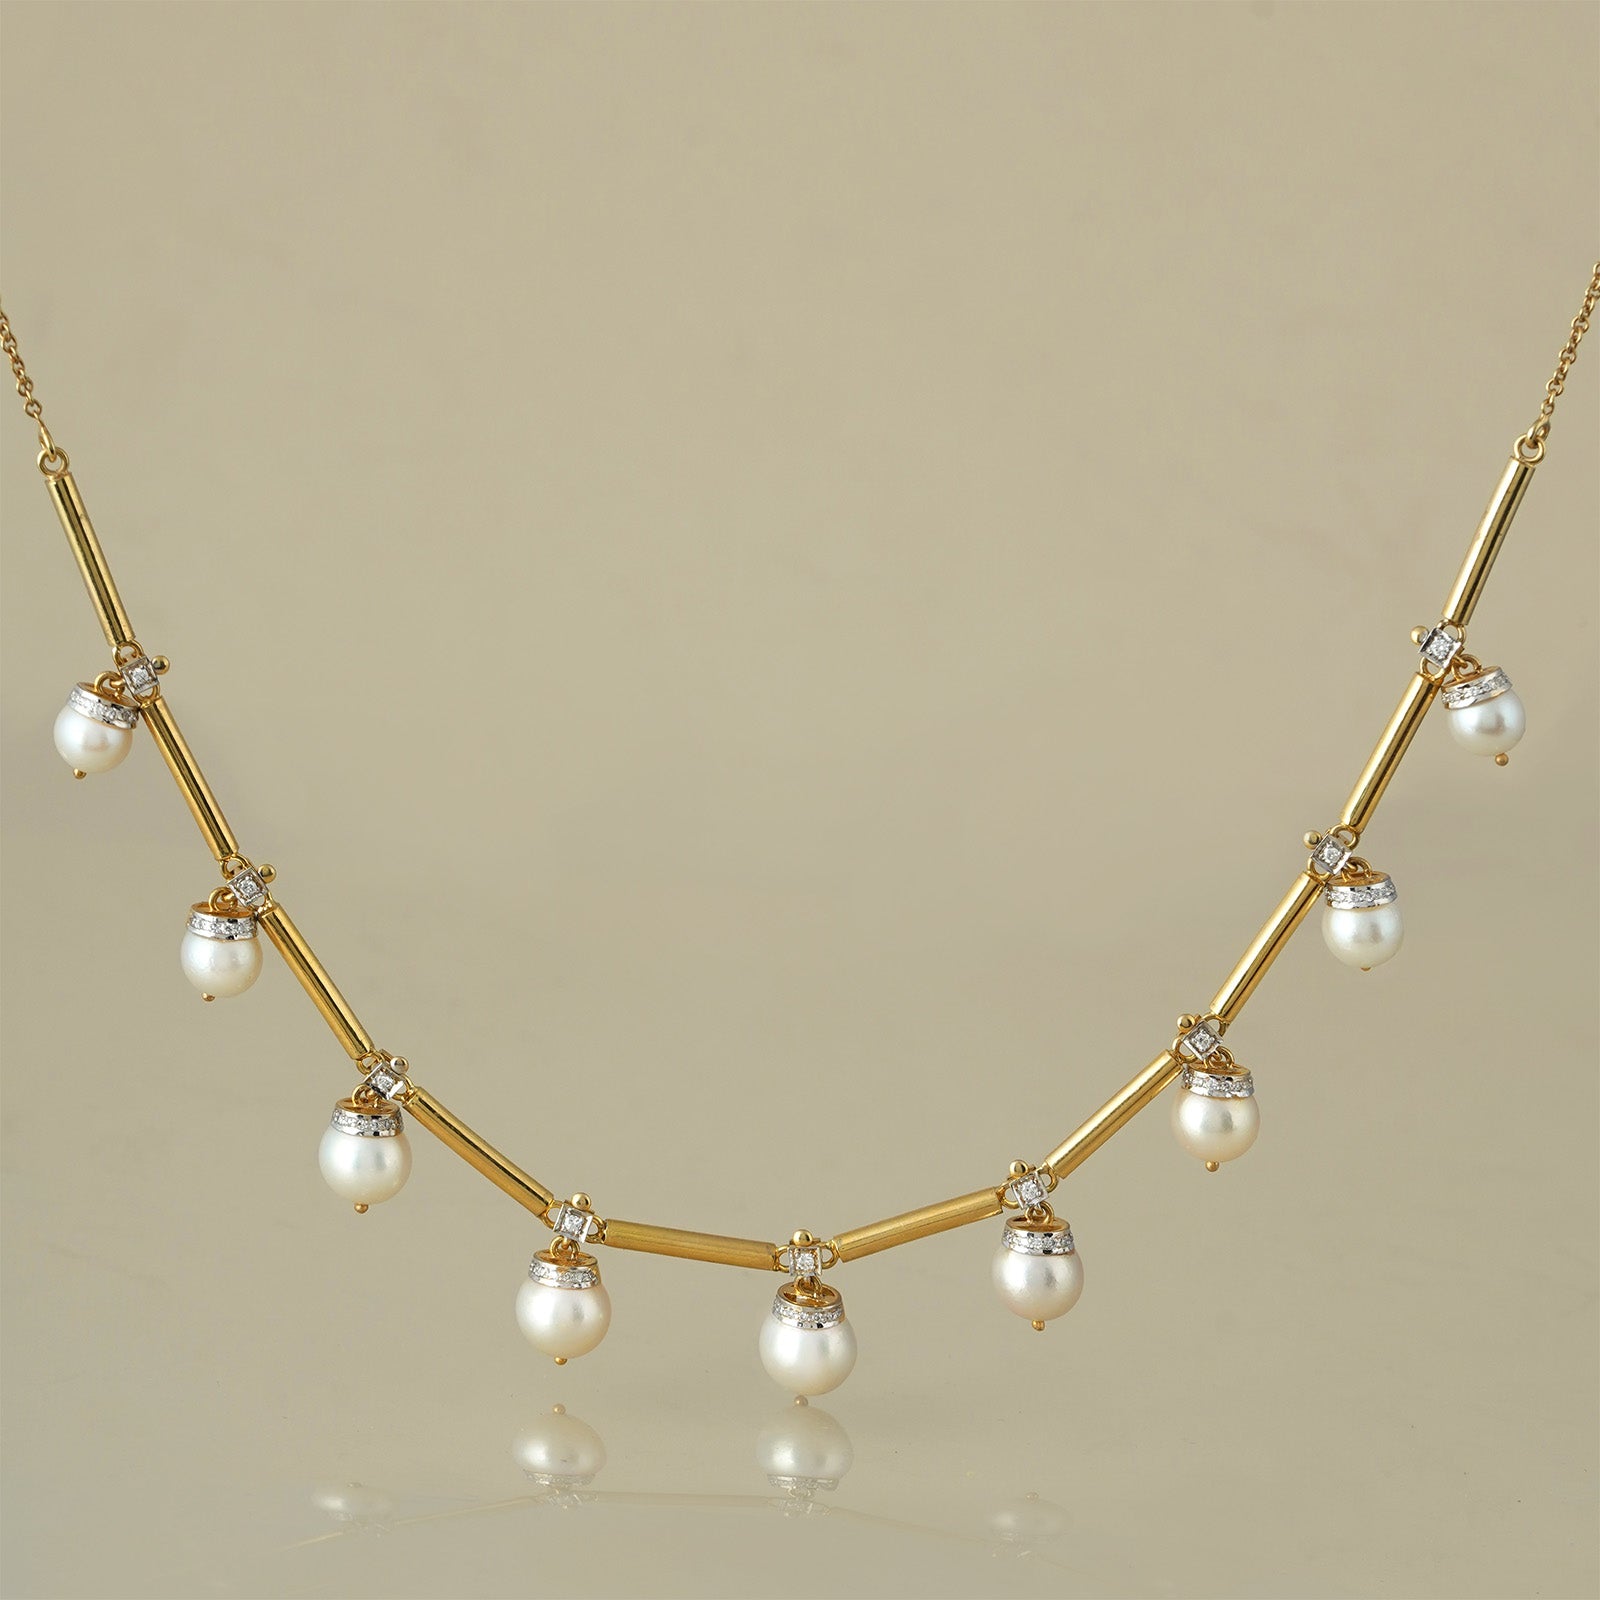 Shae Gold Diamond and Pearl Necklace – Vibe with MOI